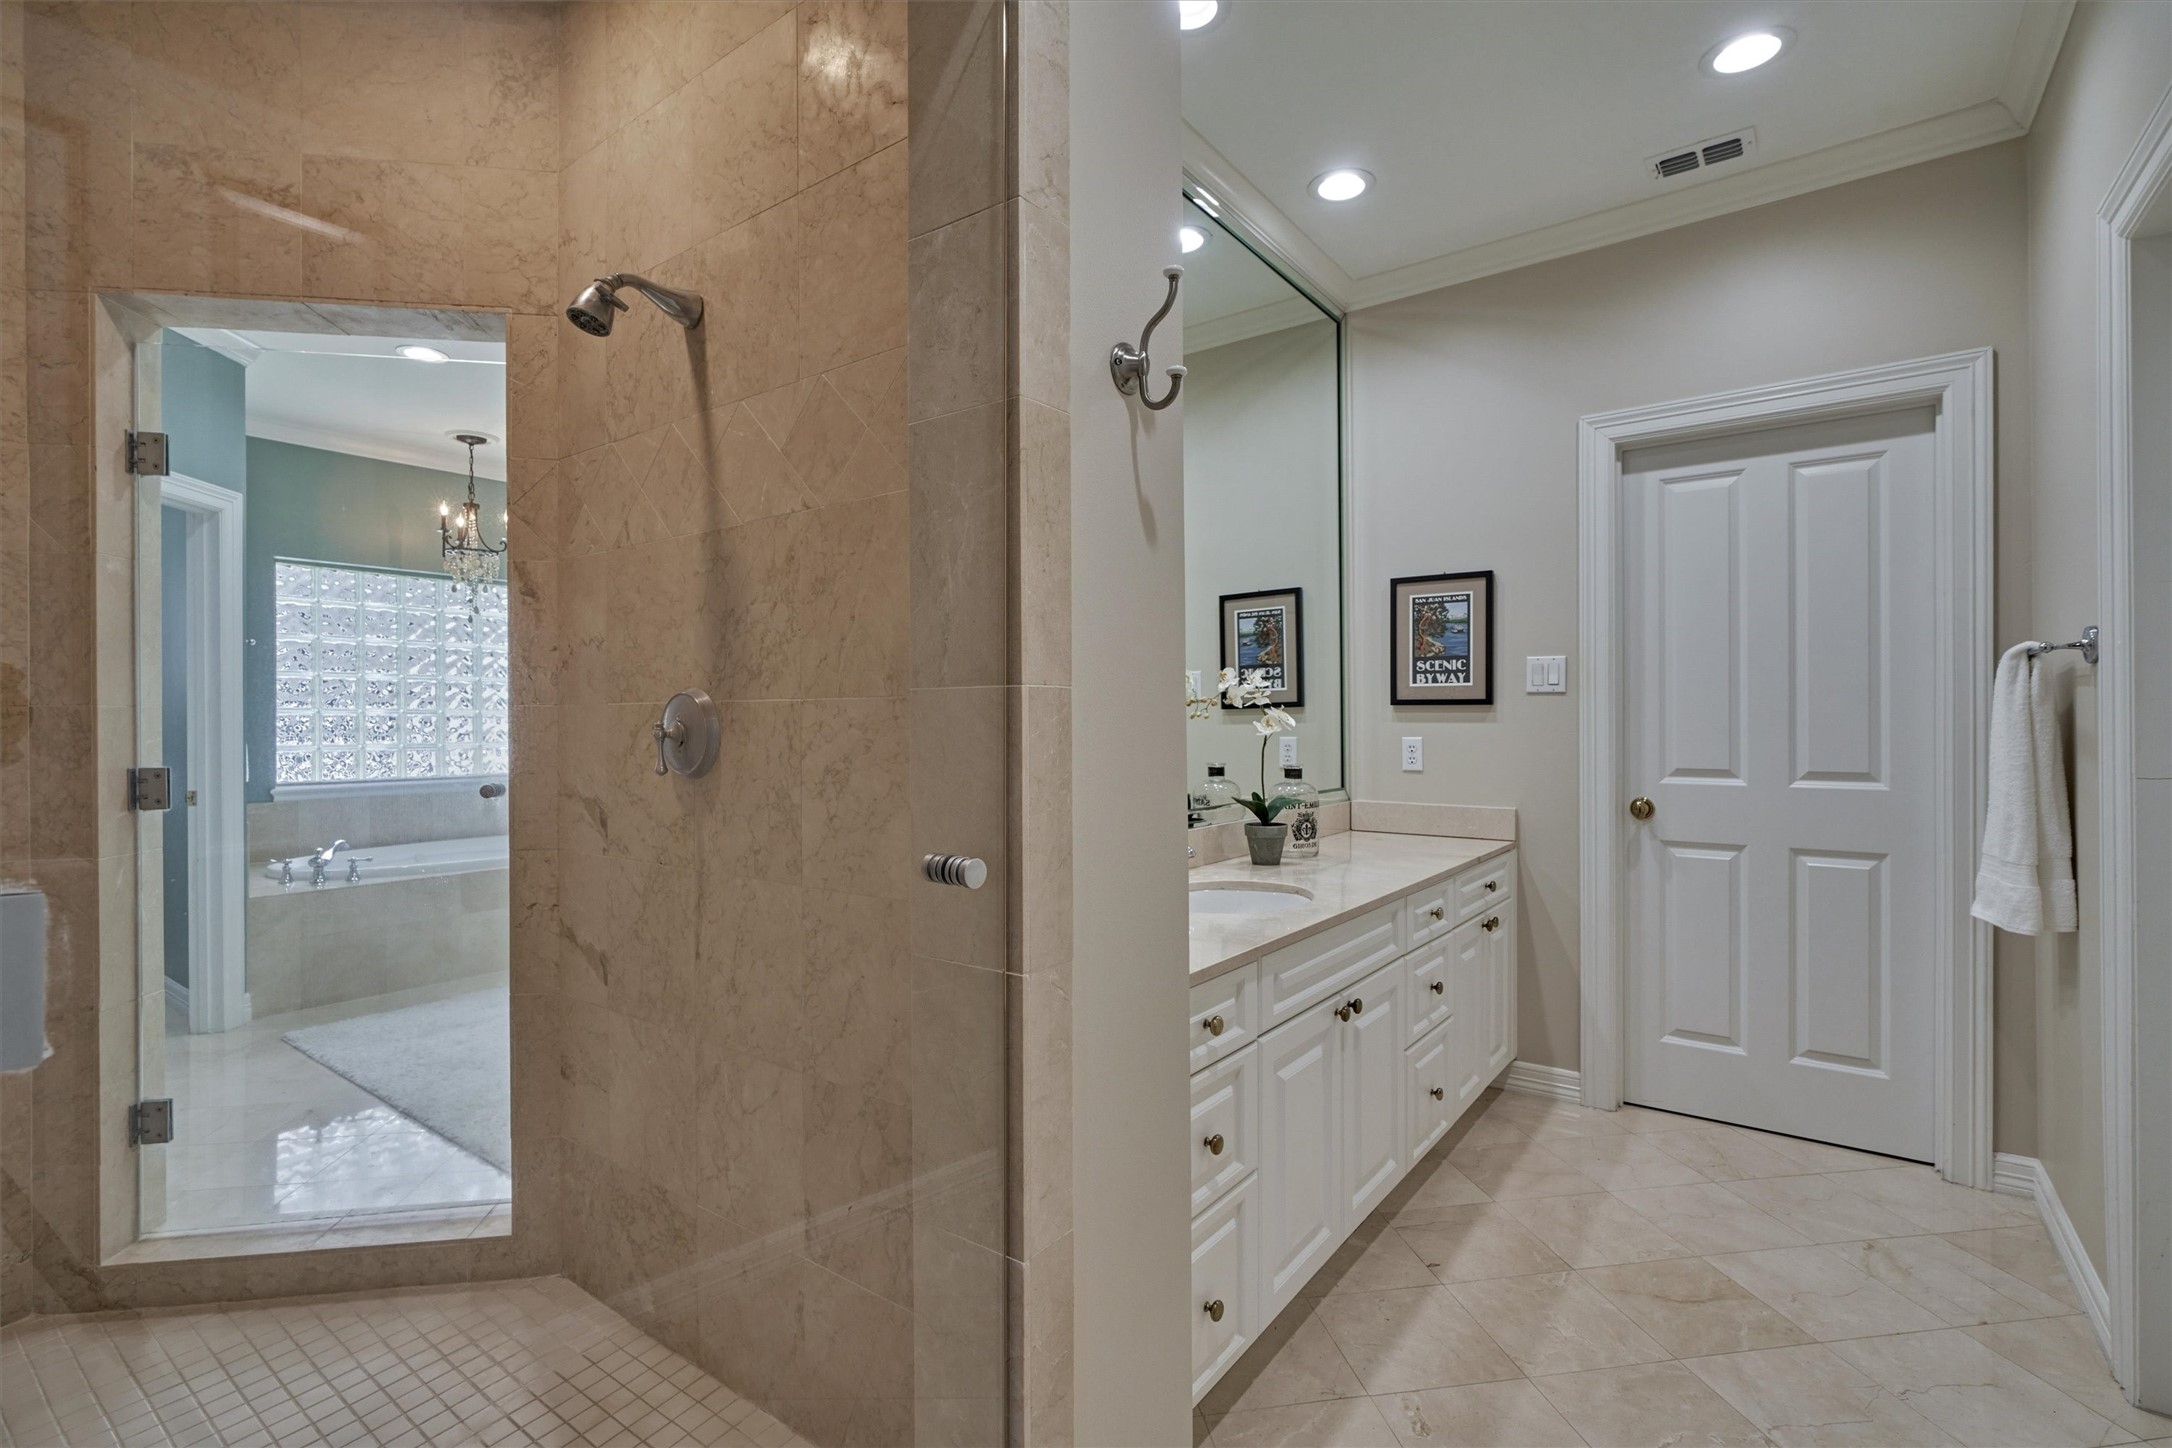 Primary spa-like bath featuring two separate private spaces, both w/ access to dual-entry shower.